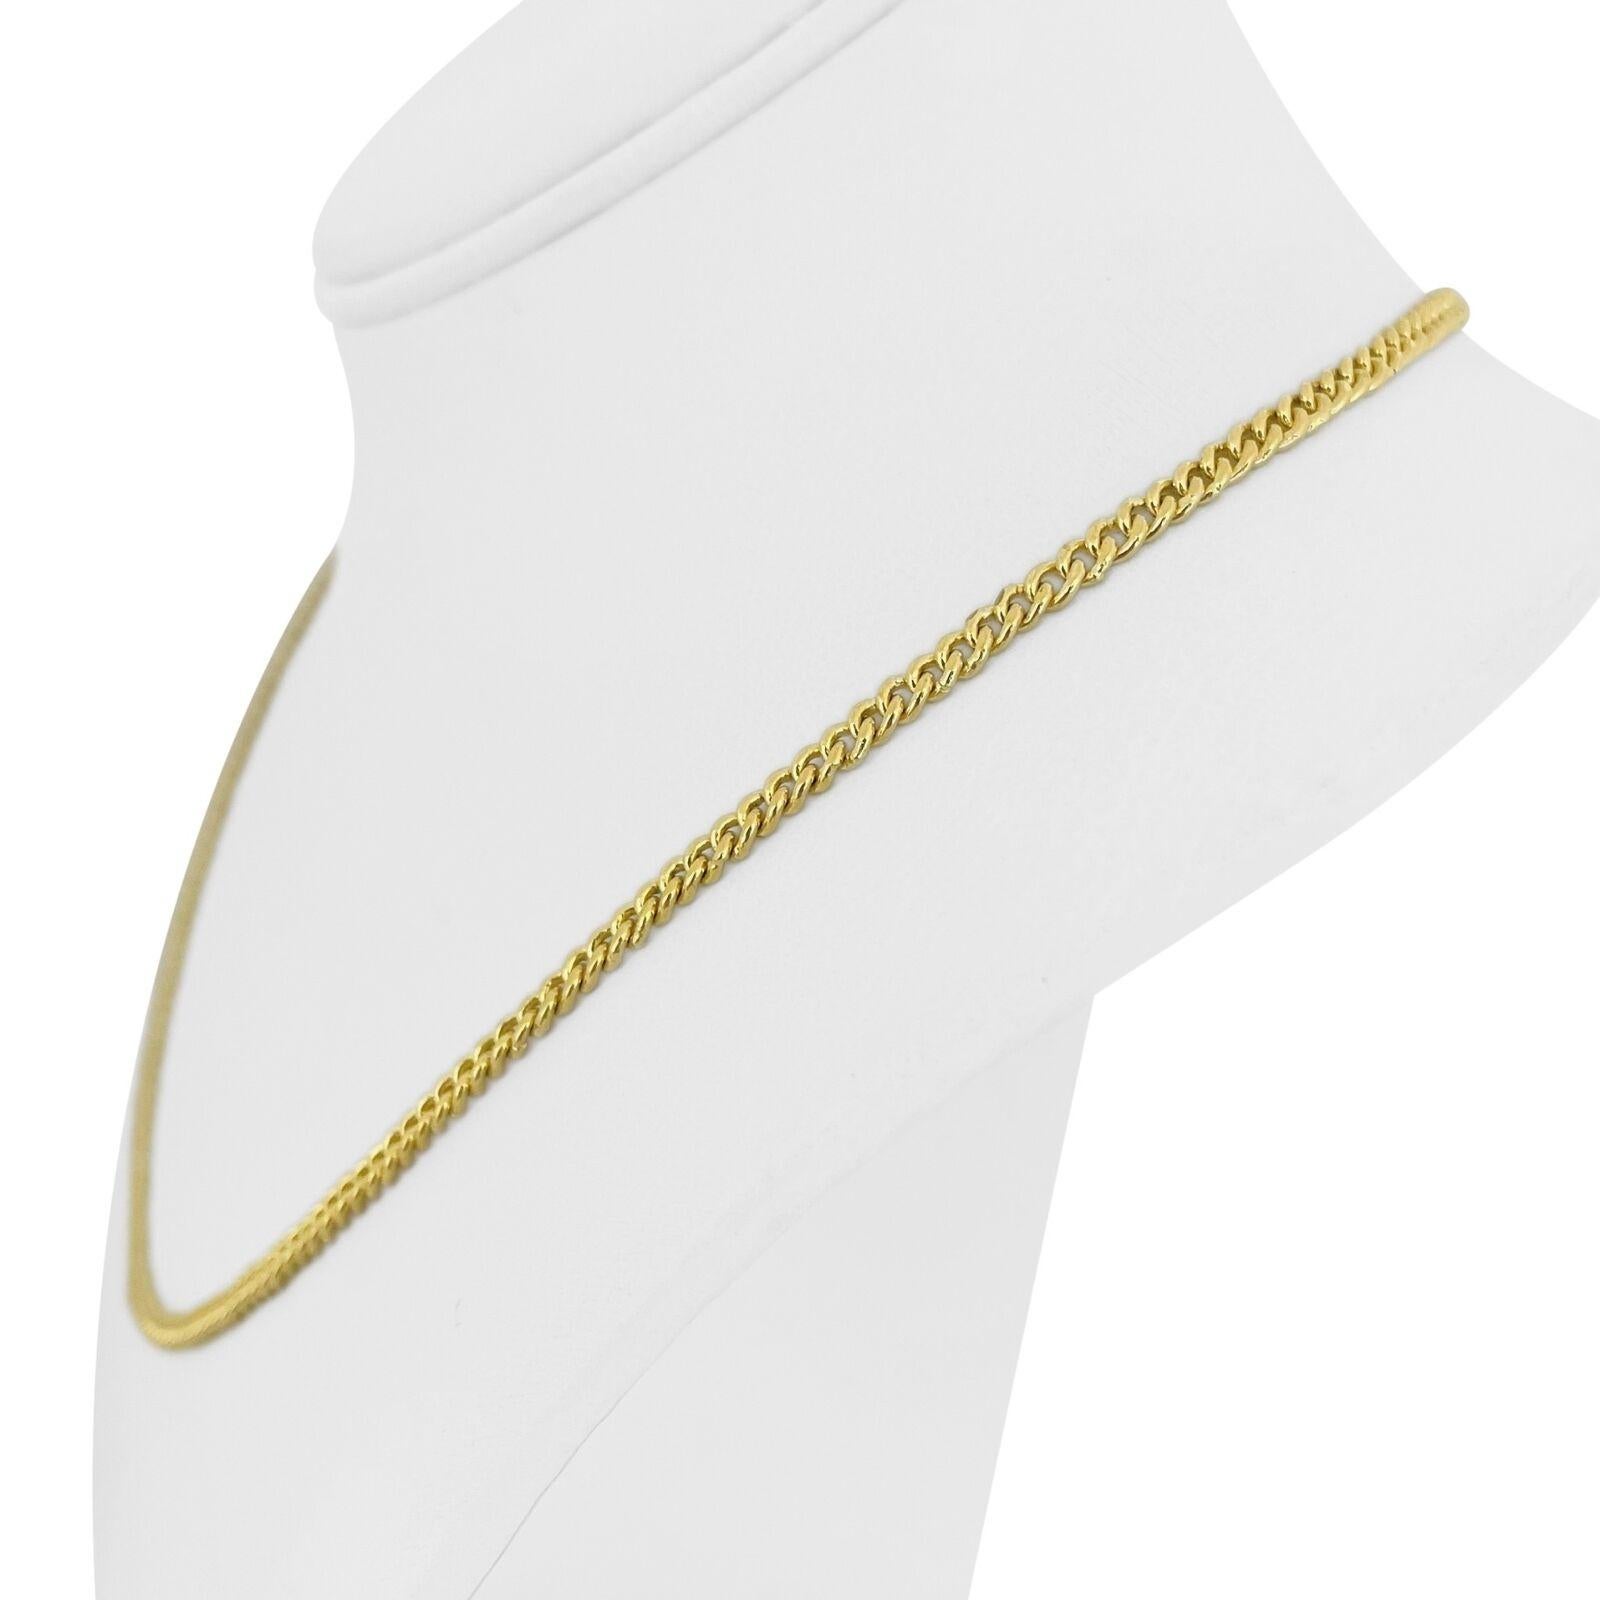 24k Pure Yellow Gold 26.2g Solid 3.5mm Curb Link Chain Necklace 19